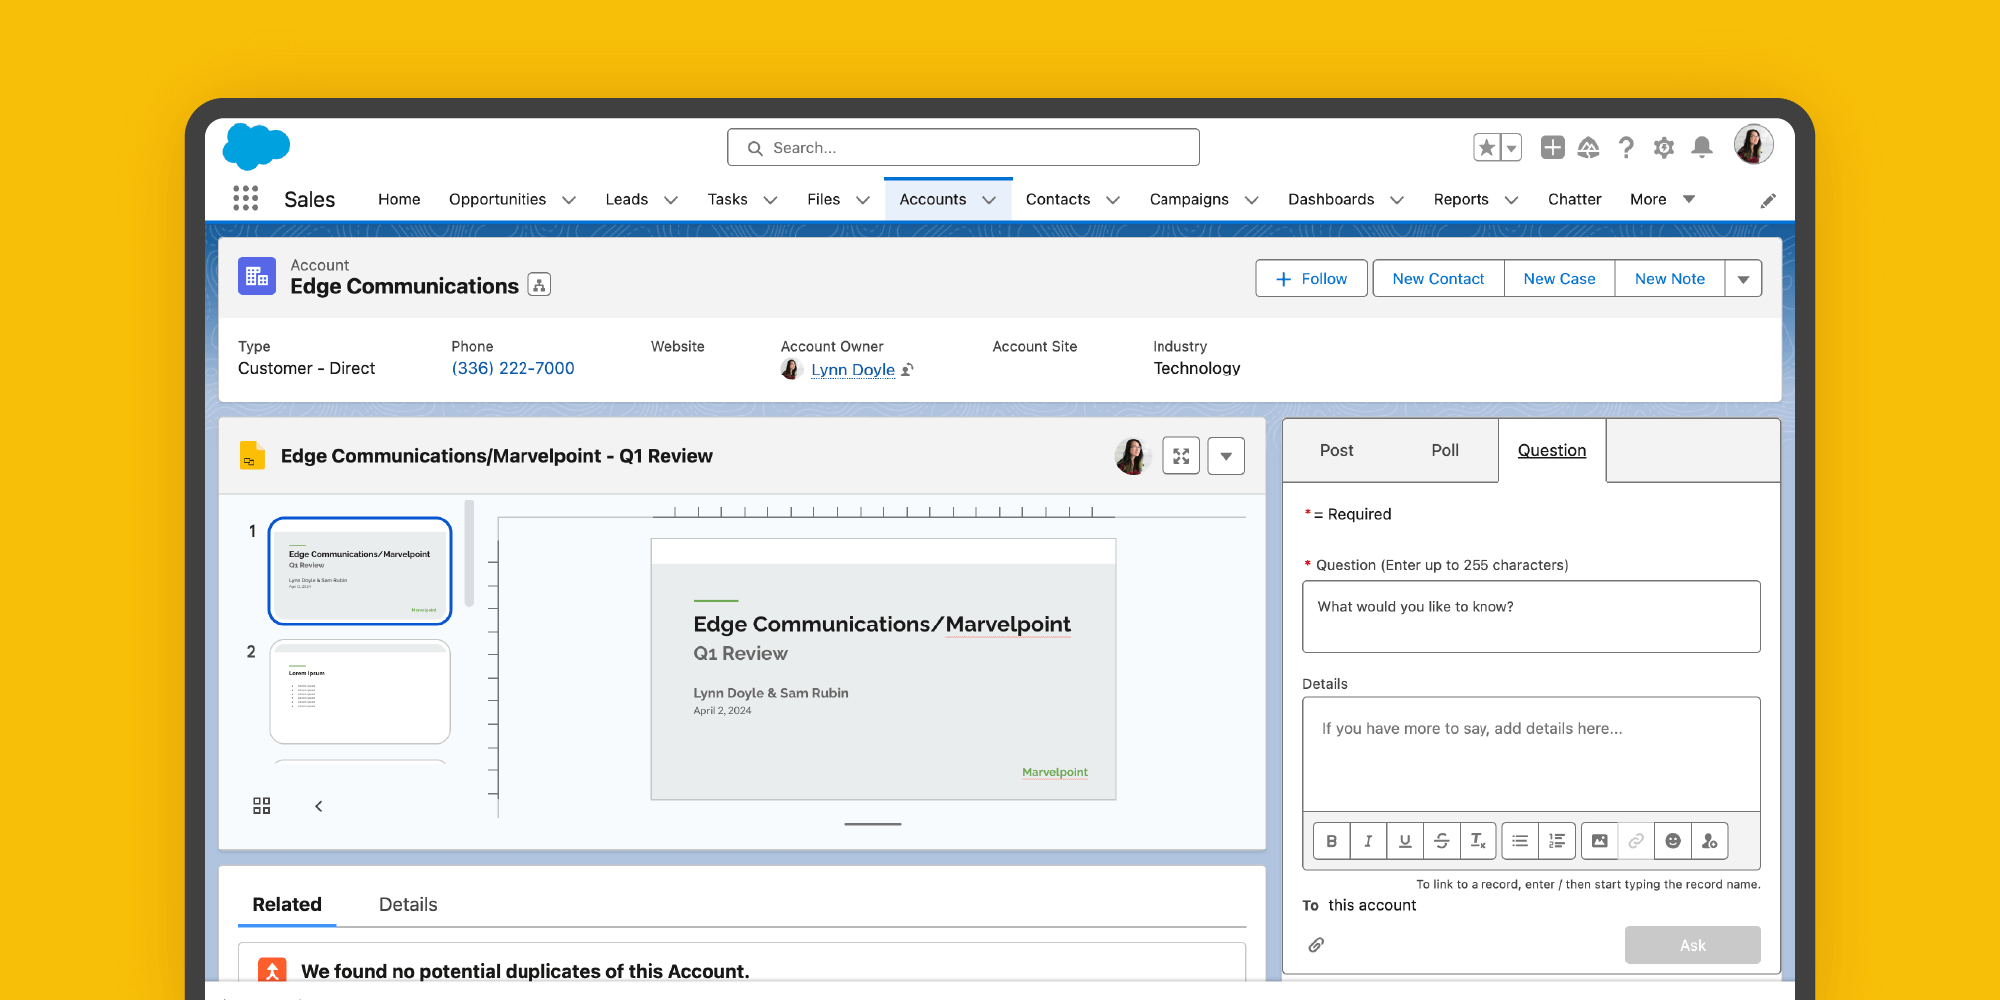 Google Sheets document embedded in a Salesforce record page